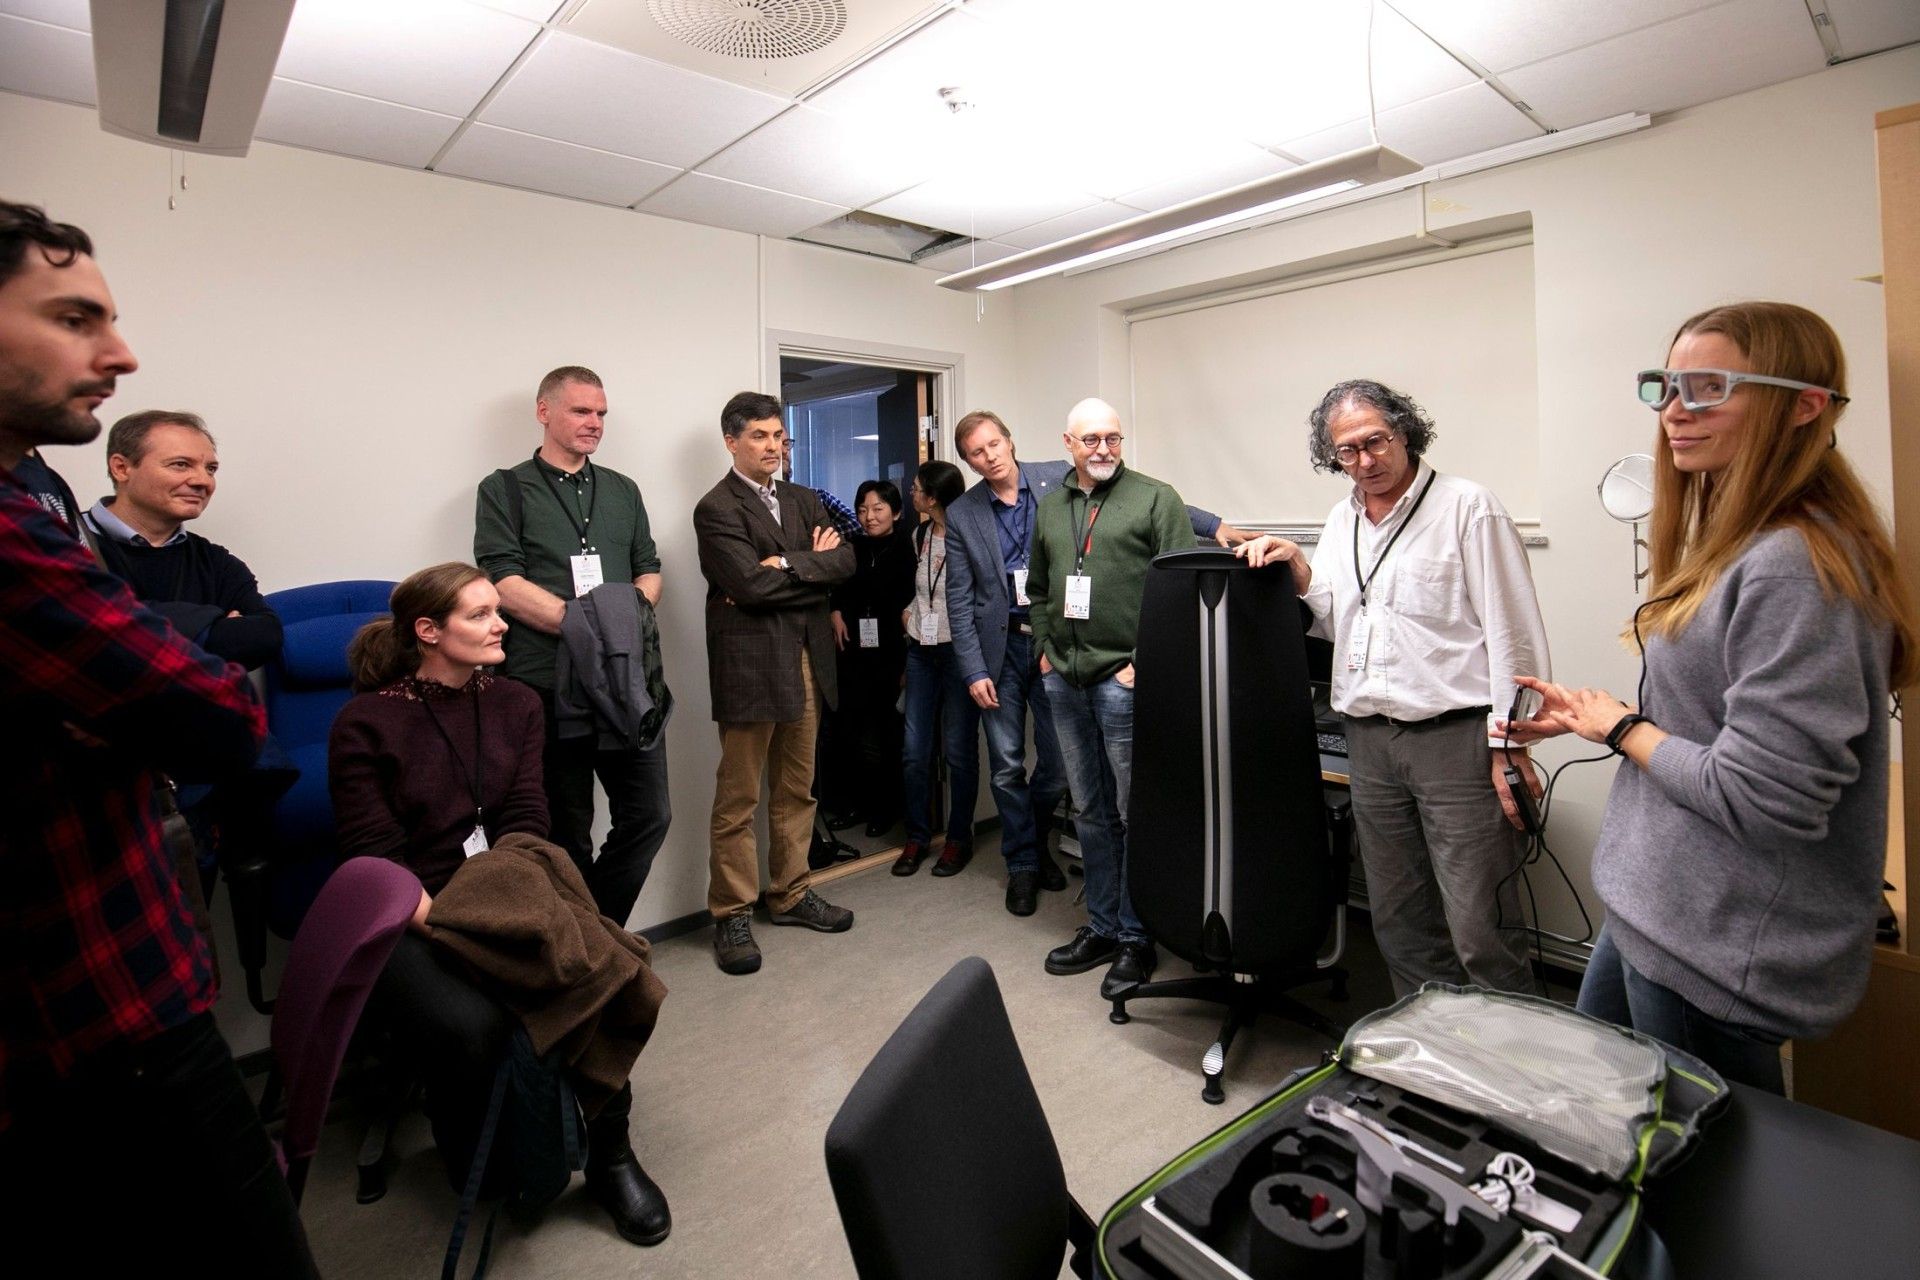 The participants got a tour of RITMO&#39;s state-of-the-art lab facilities. Here professor Bruno Laeng presents different eye trackers in the pupillometry lab.